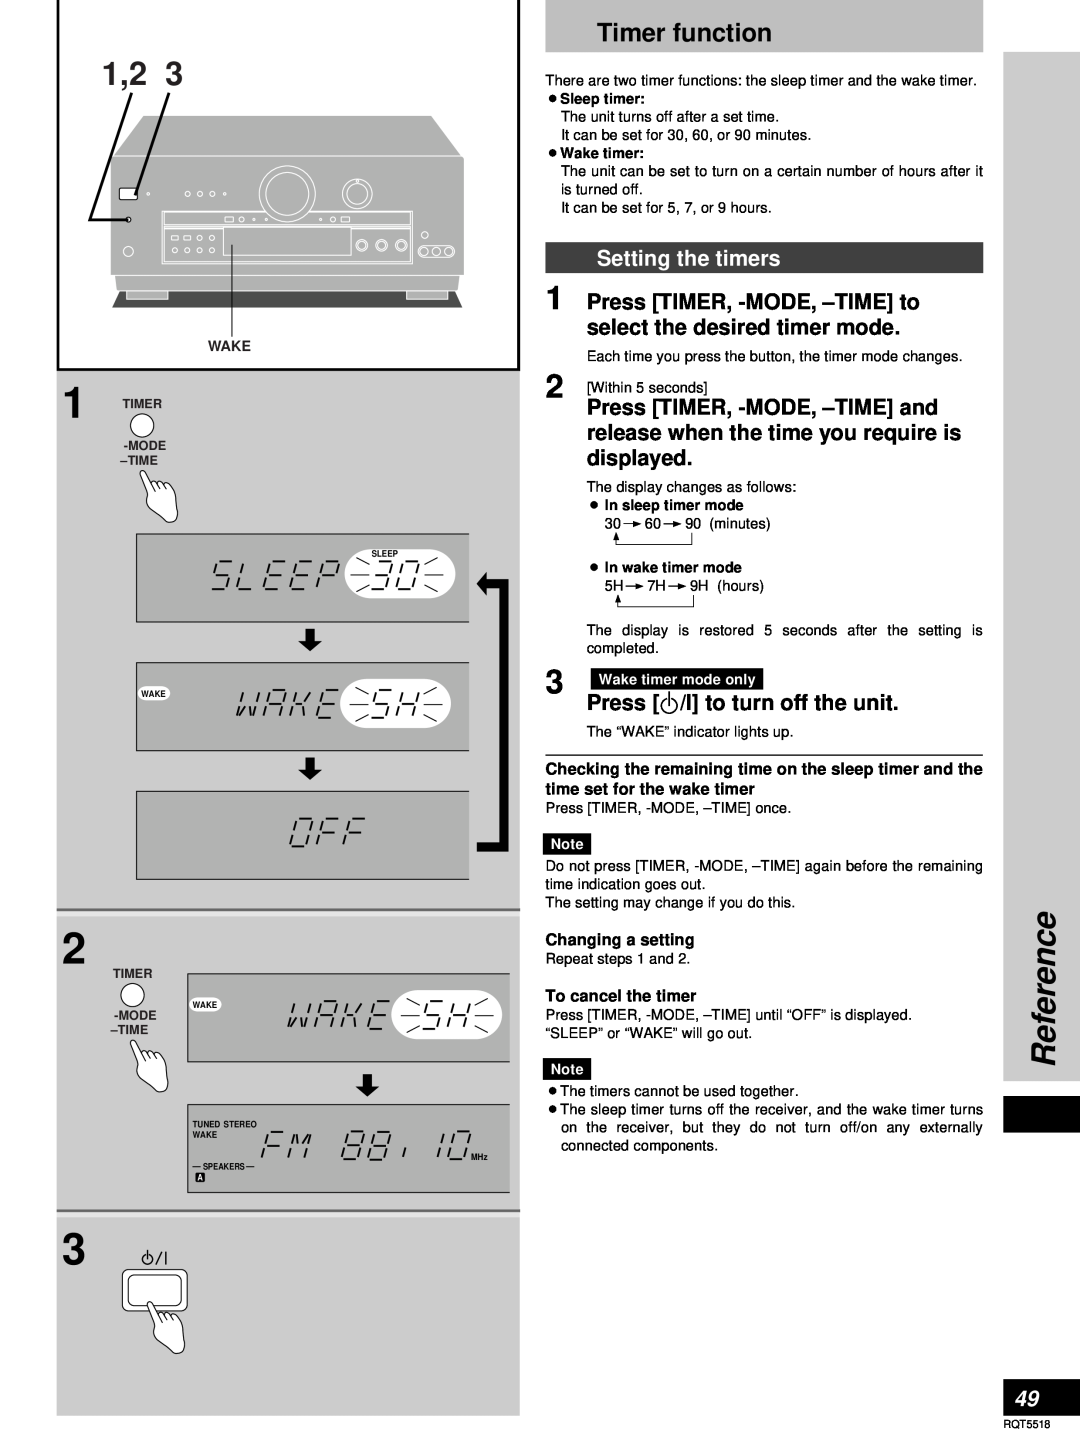 Technics SA-DA8, SA-DA10 operating instructions Reference, Timer function, Setting the timers, Press /l to turn off the unit 